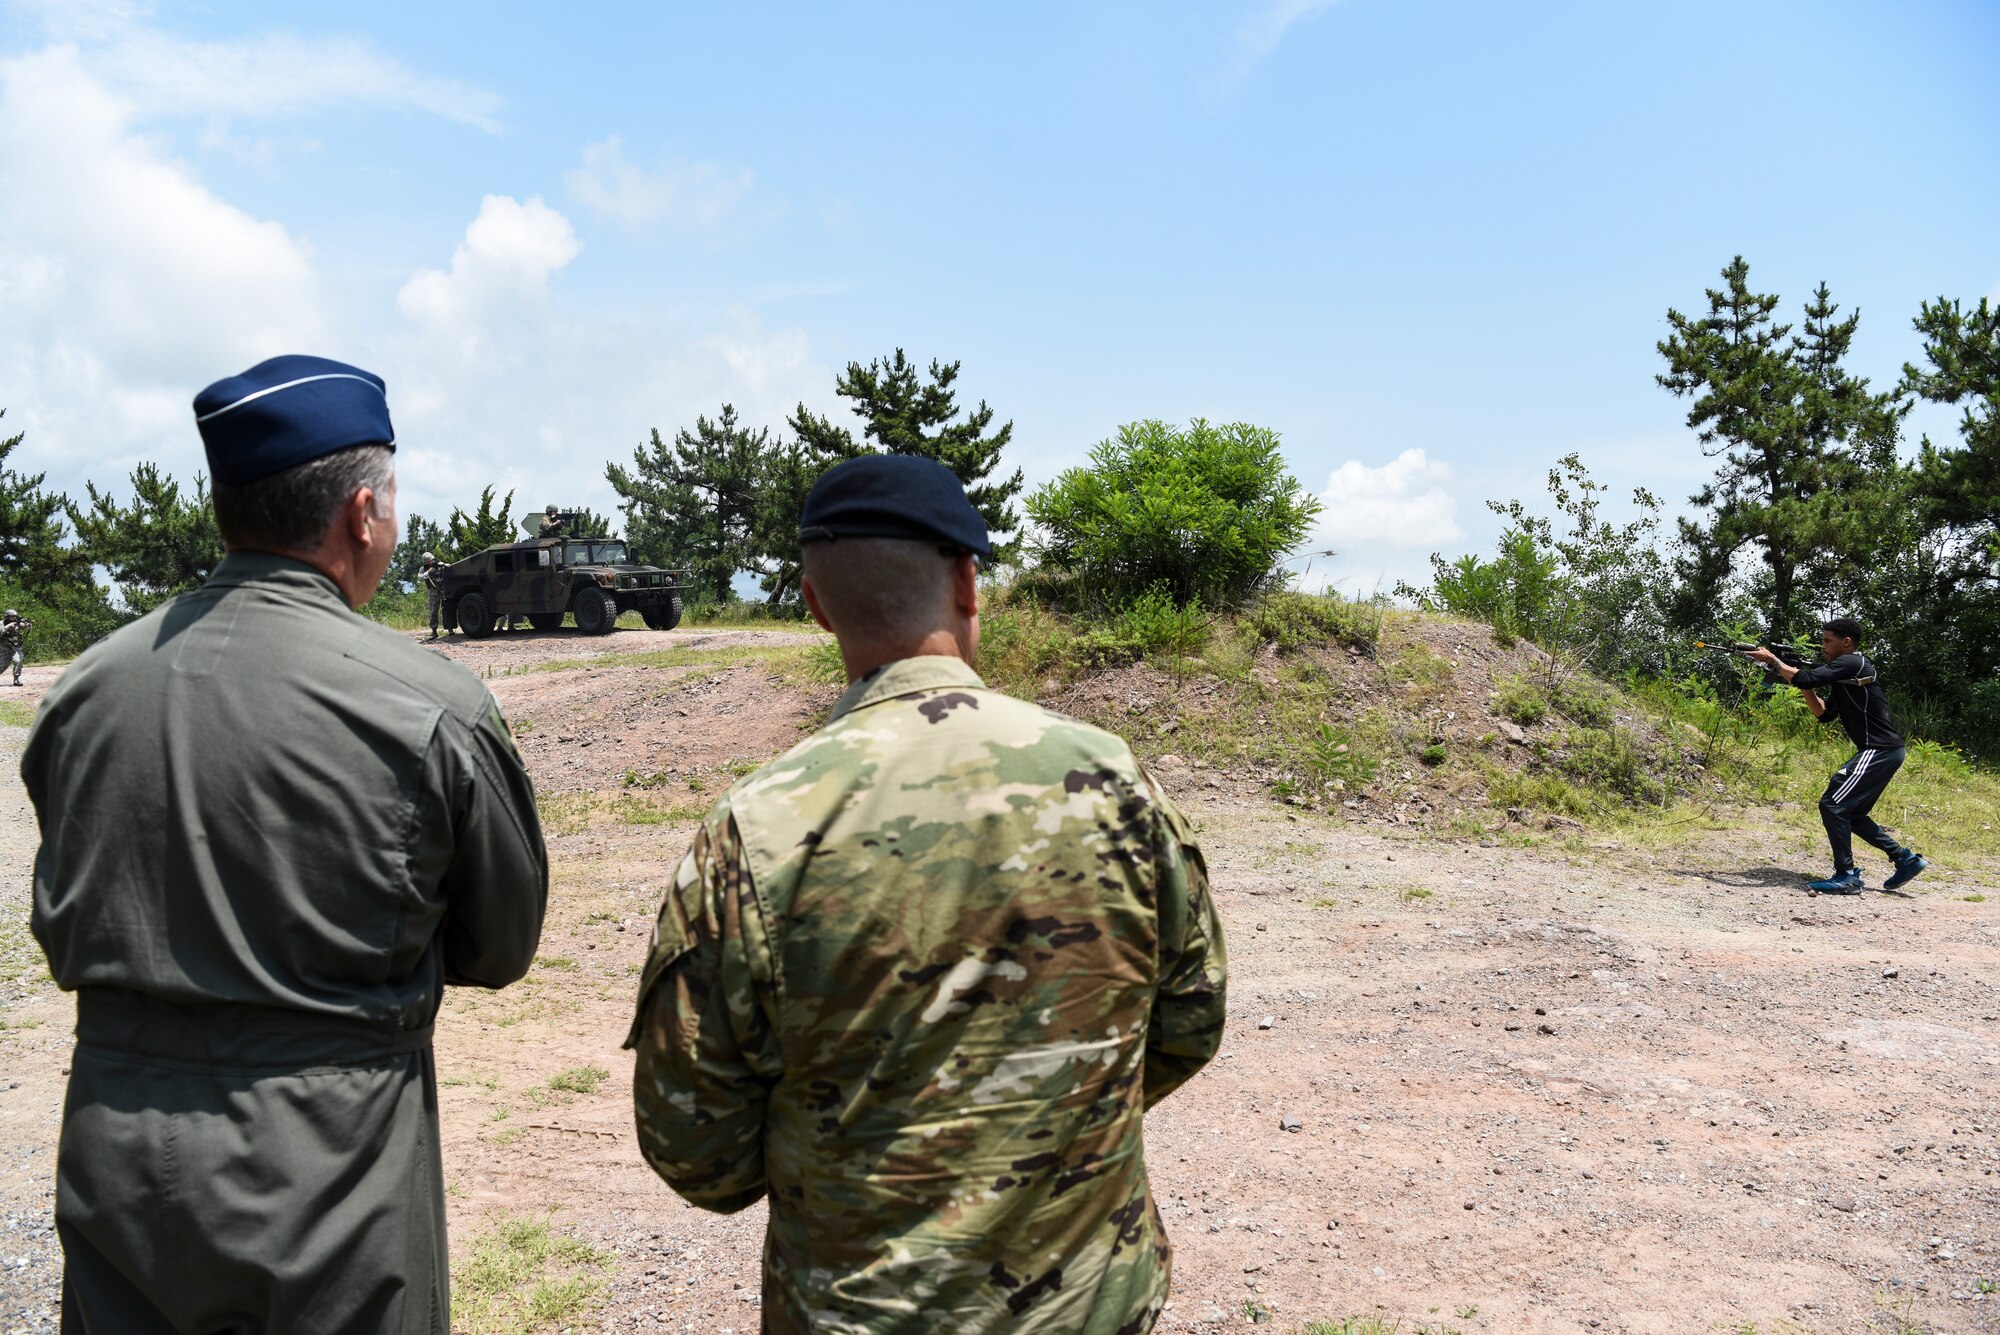 U.S. Air Force Brig. Gen. David Eaglin (left), 7th Air Force vice commander, and Lt. Col. Eric Horst, 8th Security Forces Squadron commander, observe a force-on-force demonstration during an immersion tour at Kunsan Air Base, Republic of Korea, July 12, 2019. Eaglin saw how the 8th SFS is ready to fulfill their critical role of defending the base. (U.S. Air Force photo by Staff Sgt. Joshua Edwards)